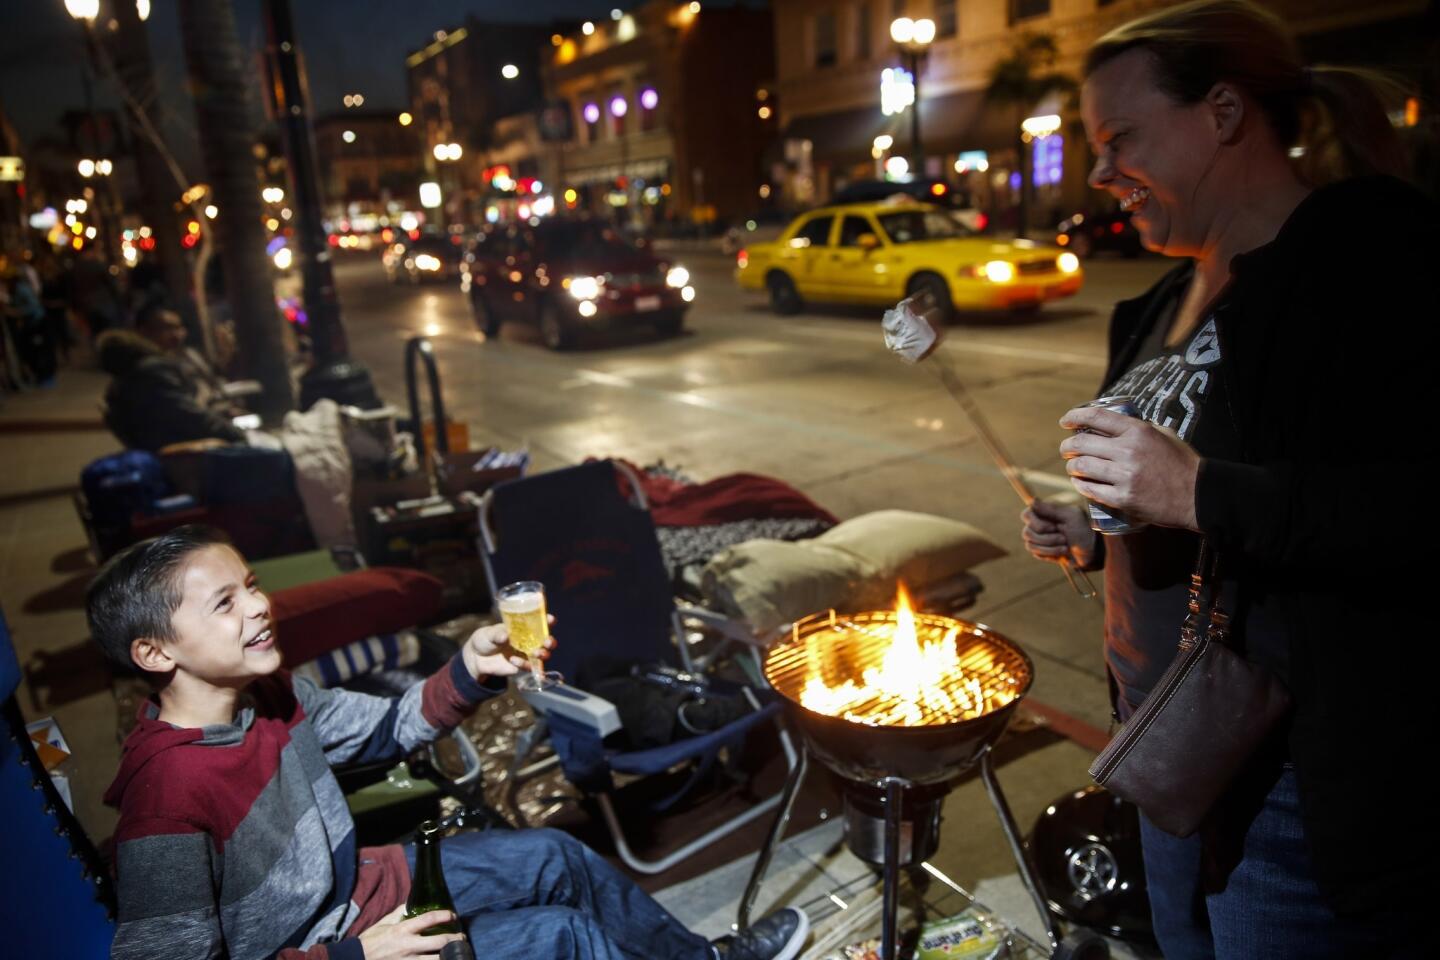 Jarod Gutierrez, 12, of Corona, prepares some sparkling cider while his mother, Susan, roasts marshmallows on Colorado Boulevard while camping out overnight.